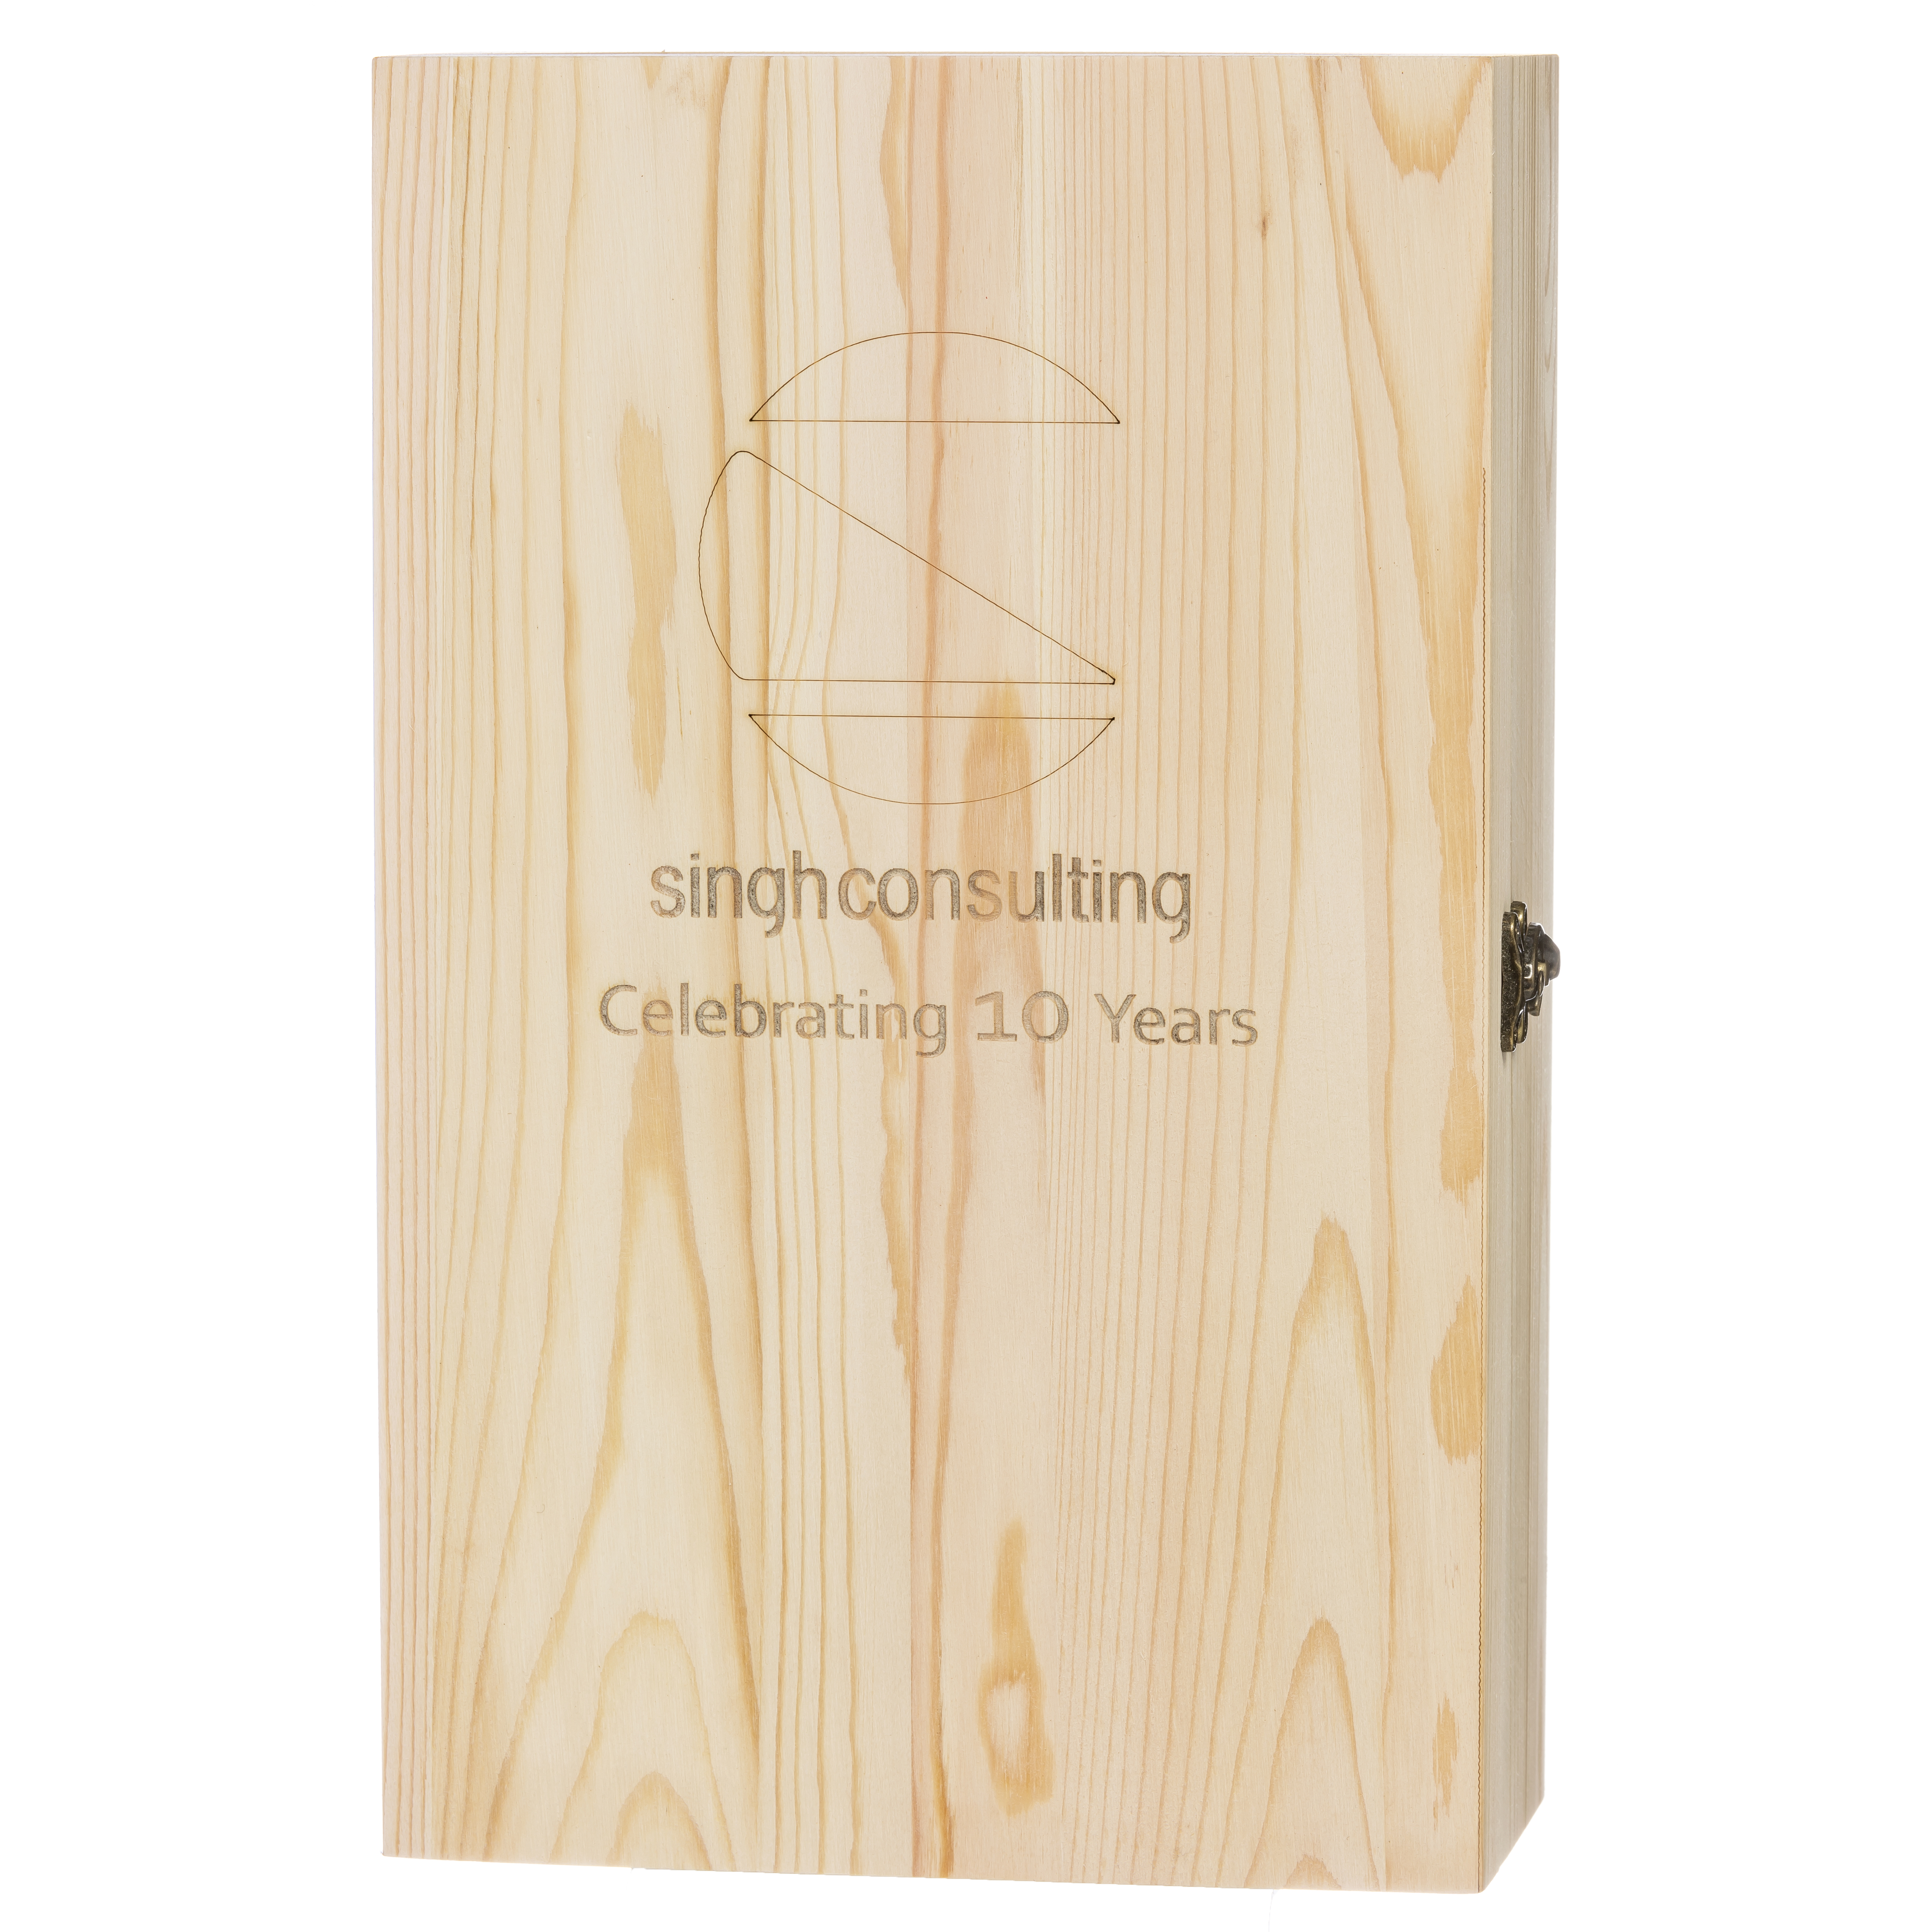 Double Wooden Box - Singh Consulting